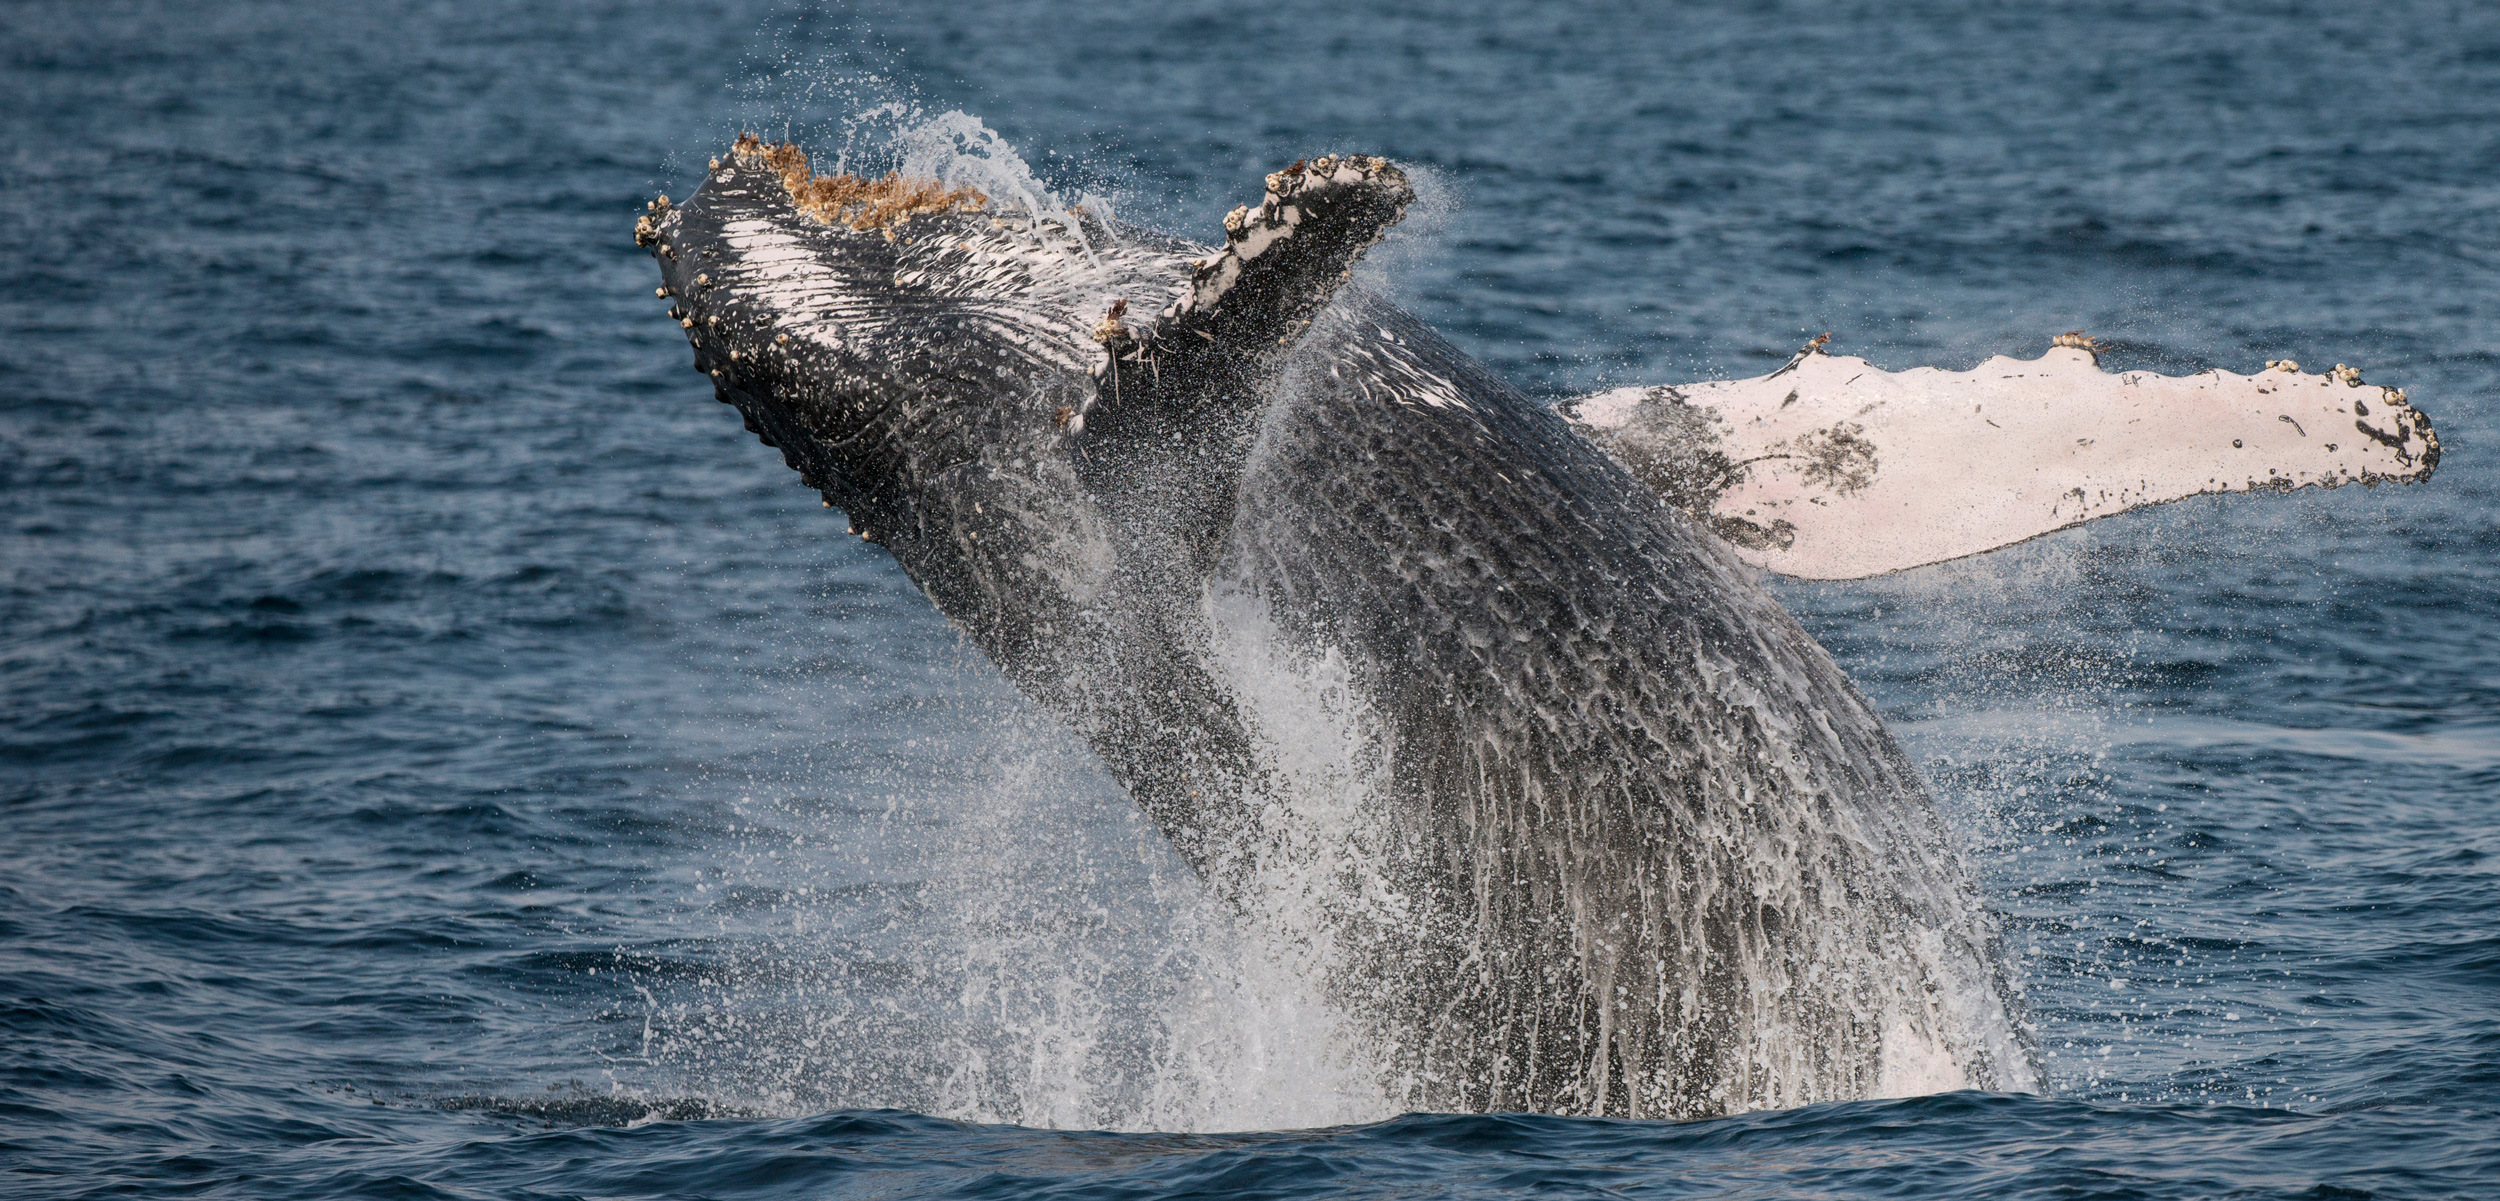 One of the most frequently asked questions about whales is why they breach. A study of humpback whales migrating past Australia offers the most definitive answers yet. Photo by Pete Oxford/Minden Pictures